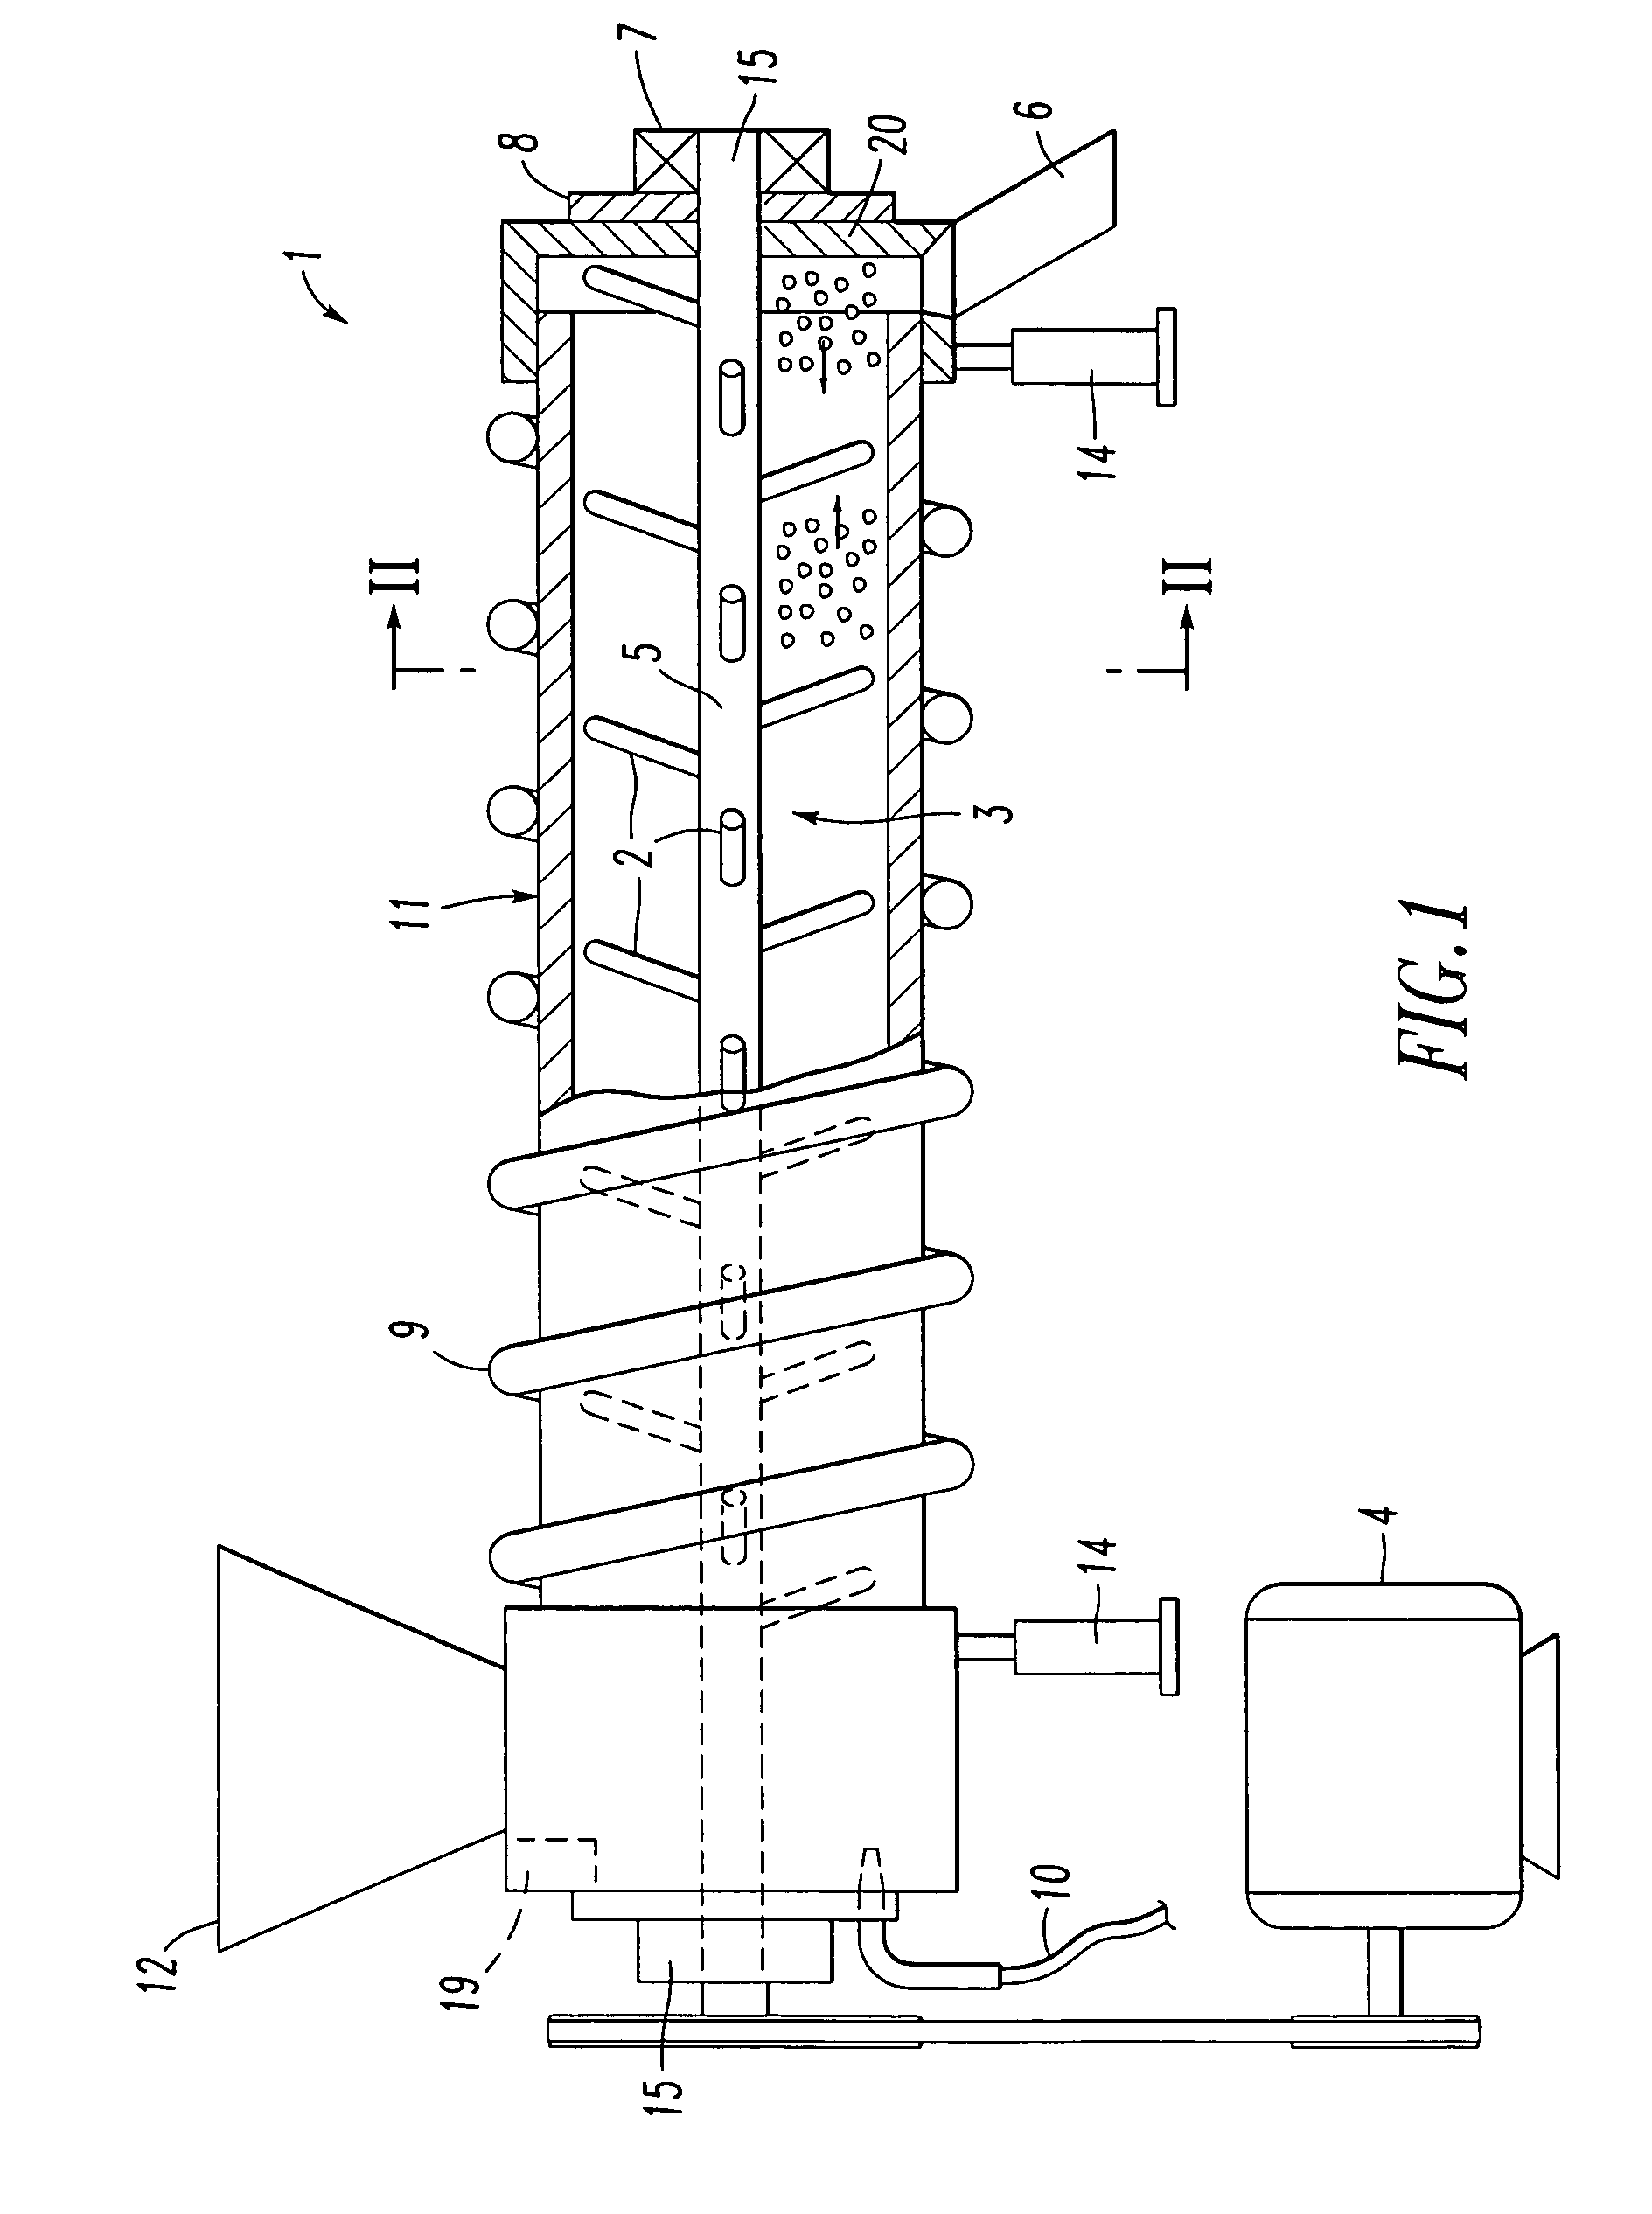 Method and apparatus for pulverizing solid materials